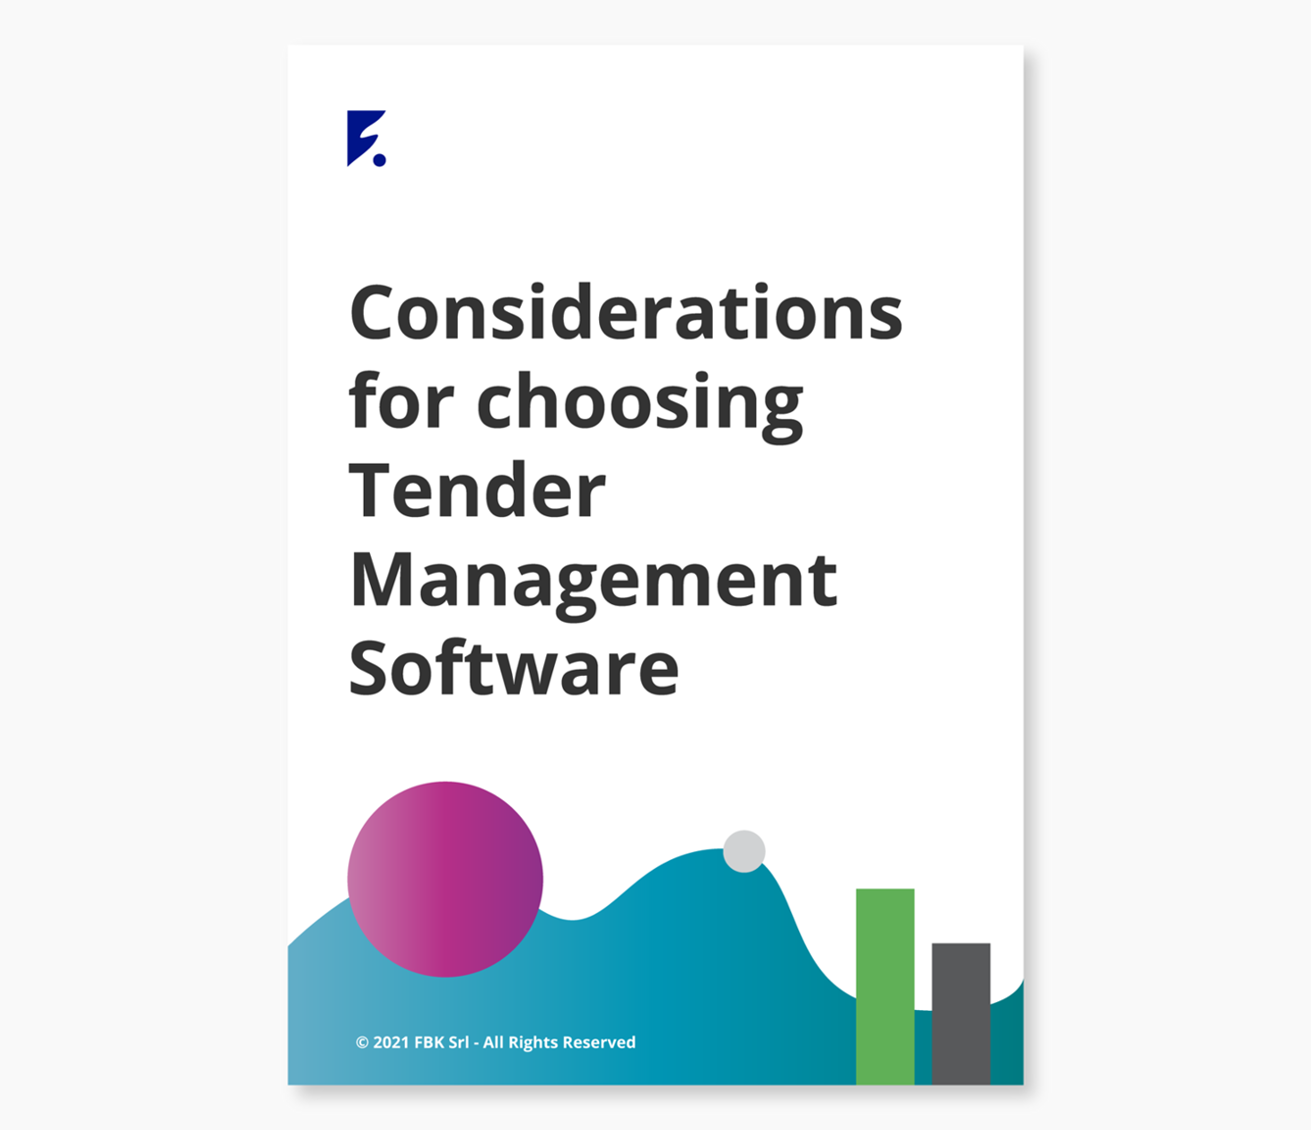 Considerations for choosing Tender Management Software